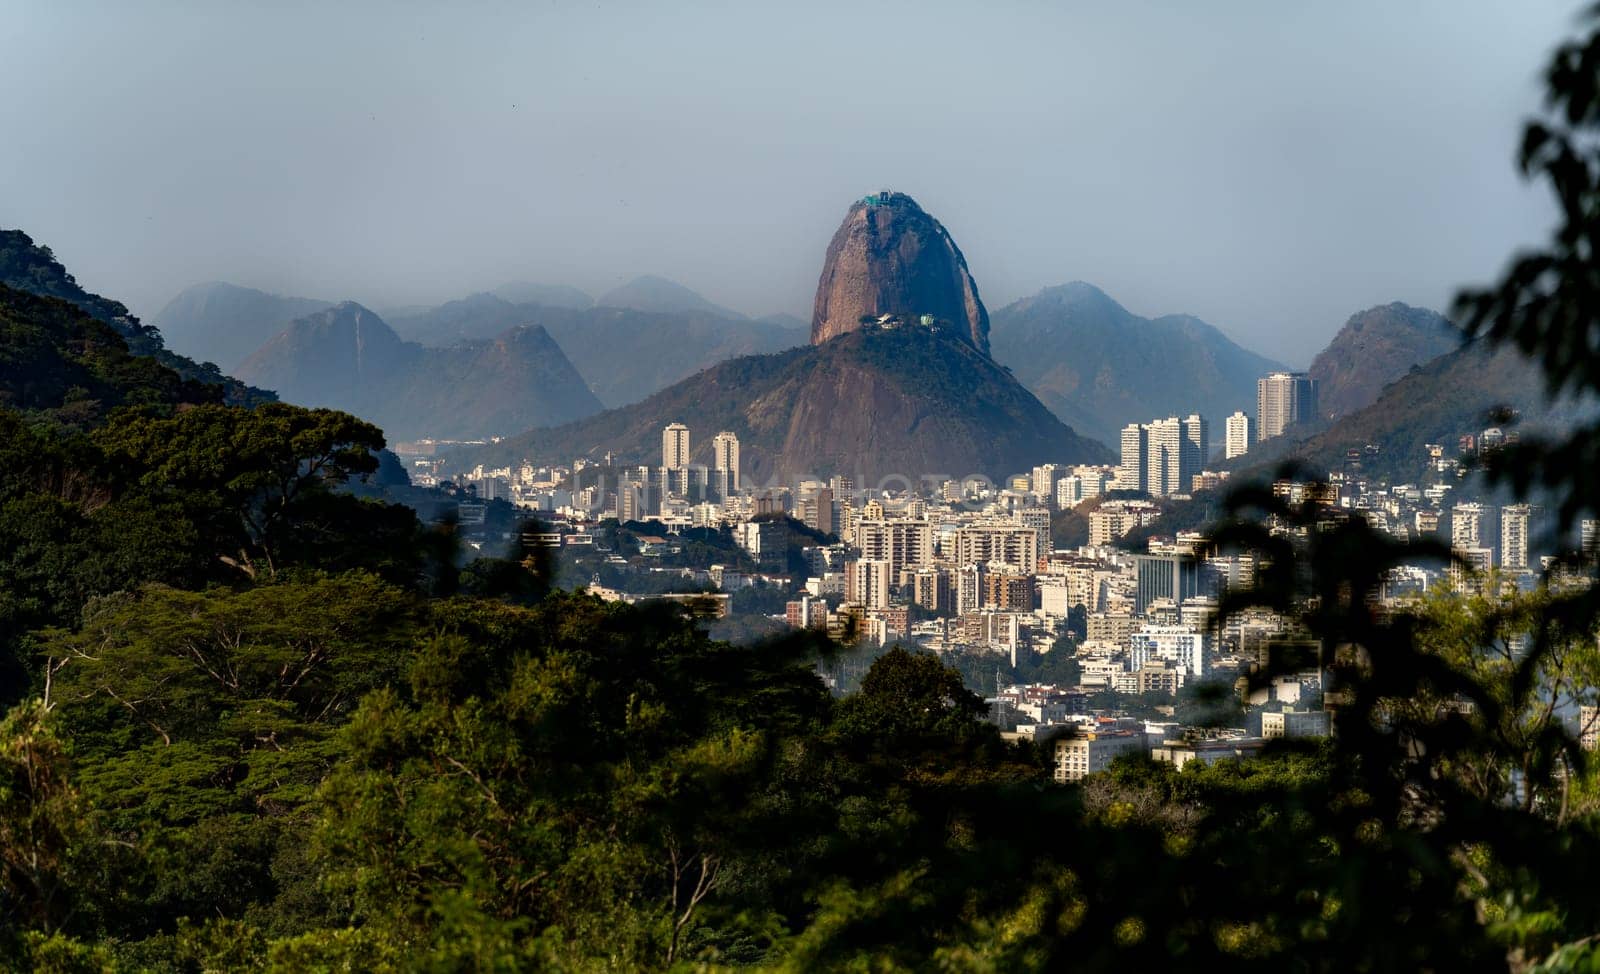 Distant View of Sugarloaf Mountain and Urca Hill in Rio de Janeiro Cityscape by FerradalFCG